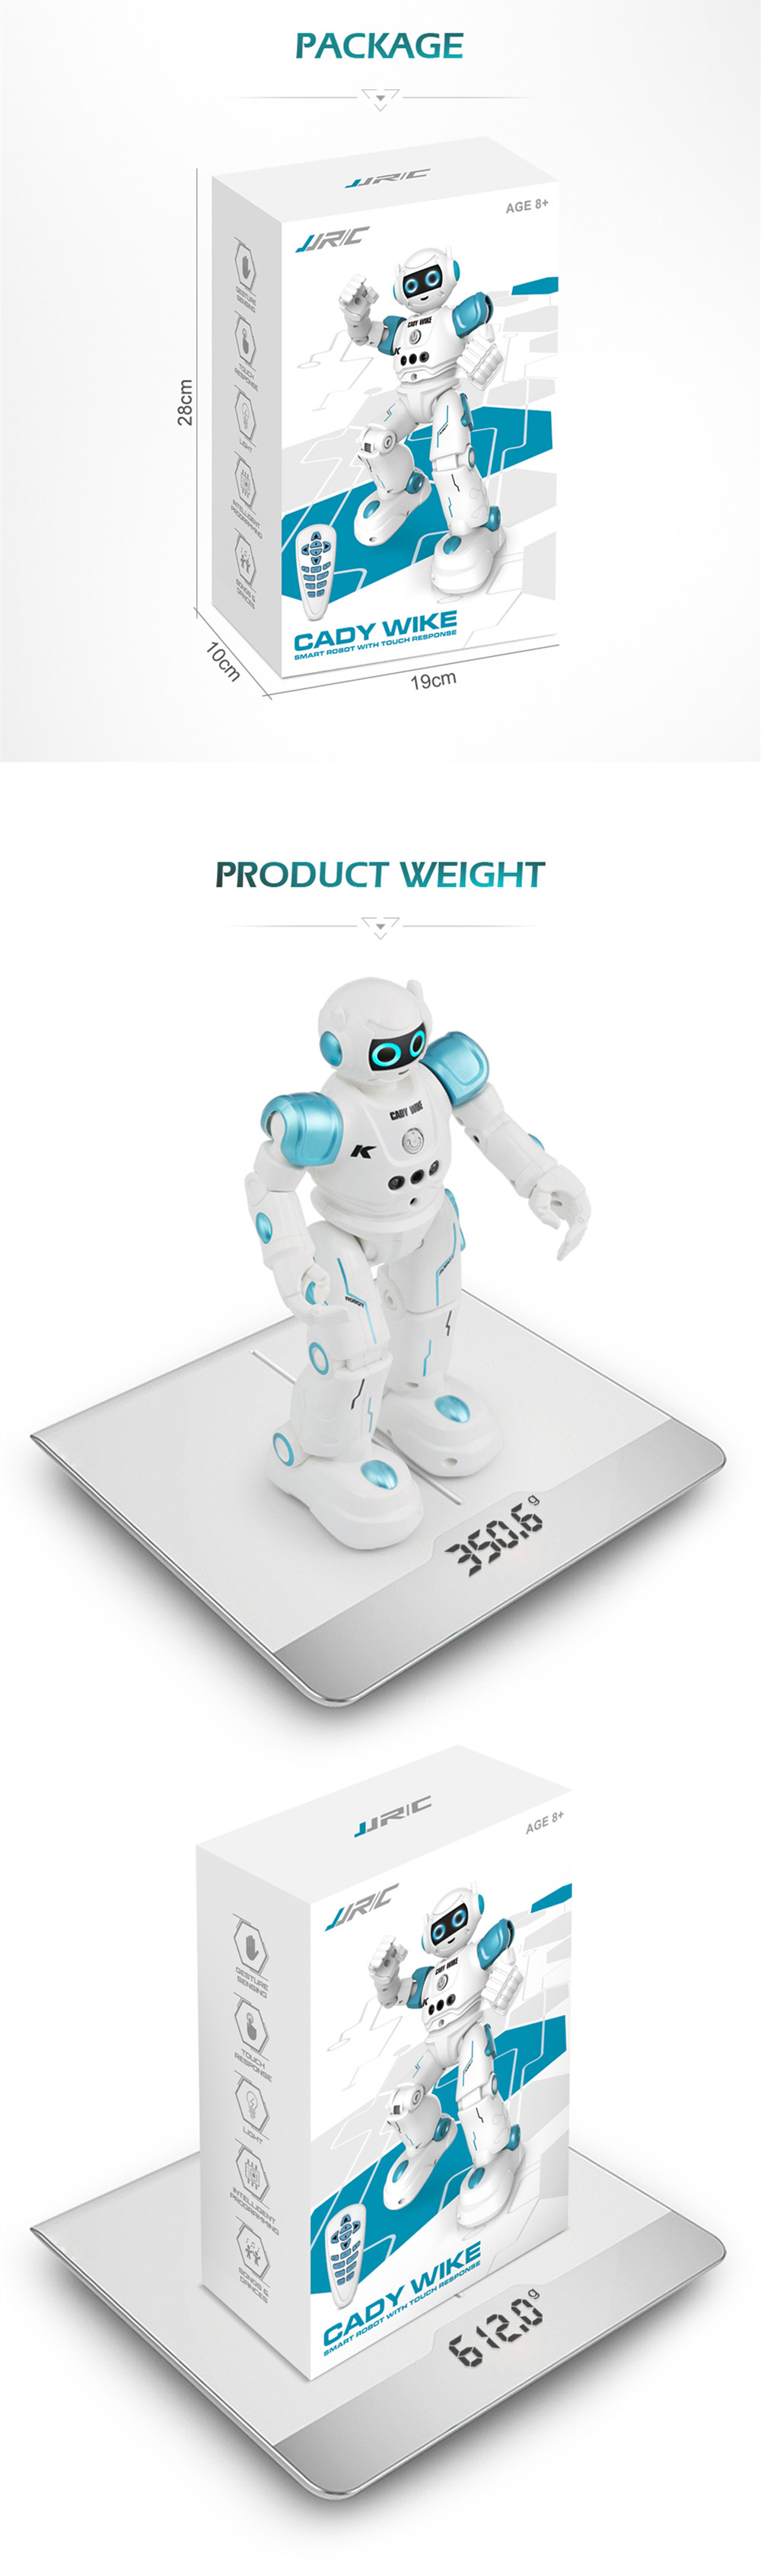 JJRC-R11-CADY-WIKE-Smart-RC-Robot-Gesture-Sensing-Touch-Intelligent-Programming-Dancing-Patrol-Toy-1367359